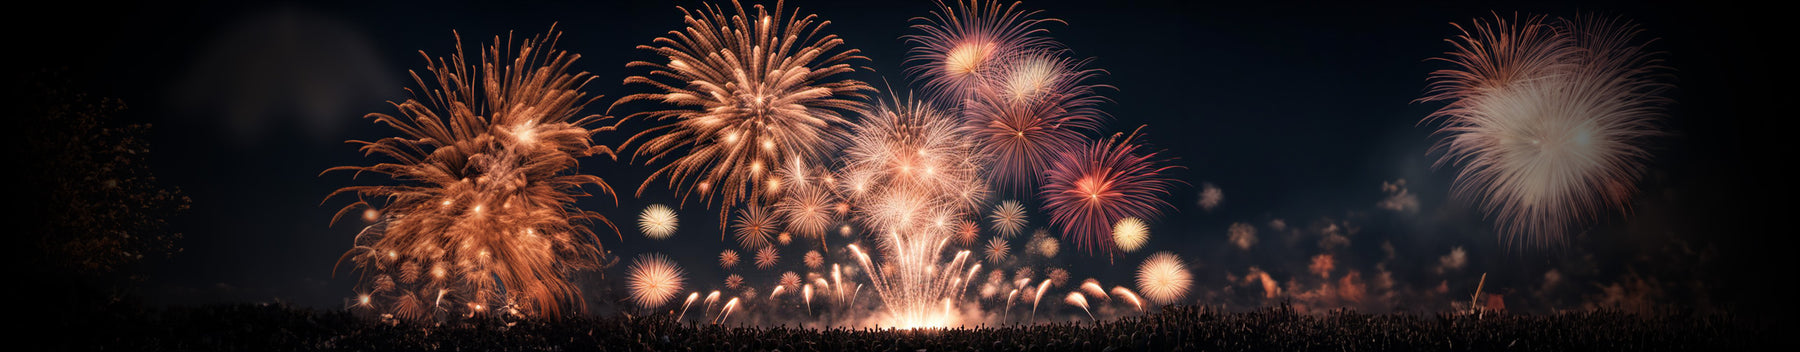 Firework Competitions Around the World